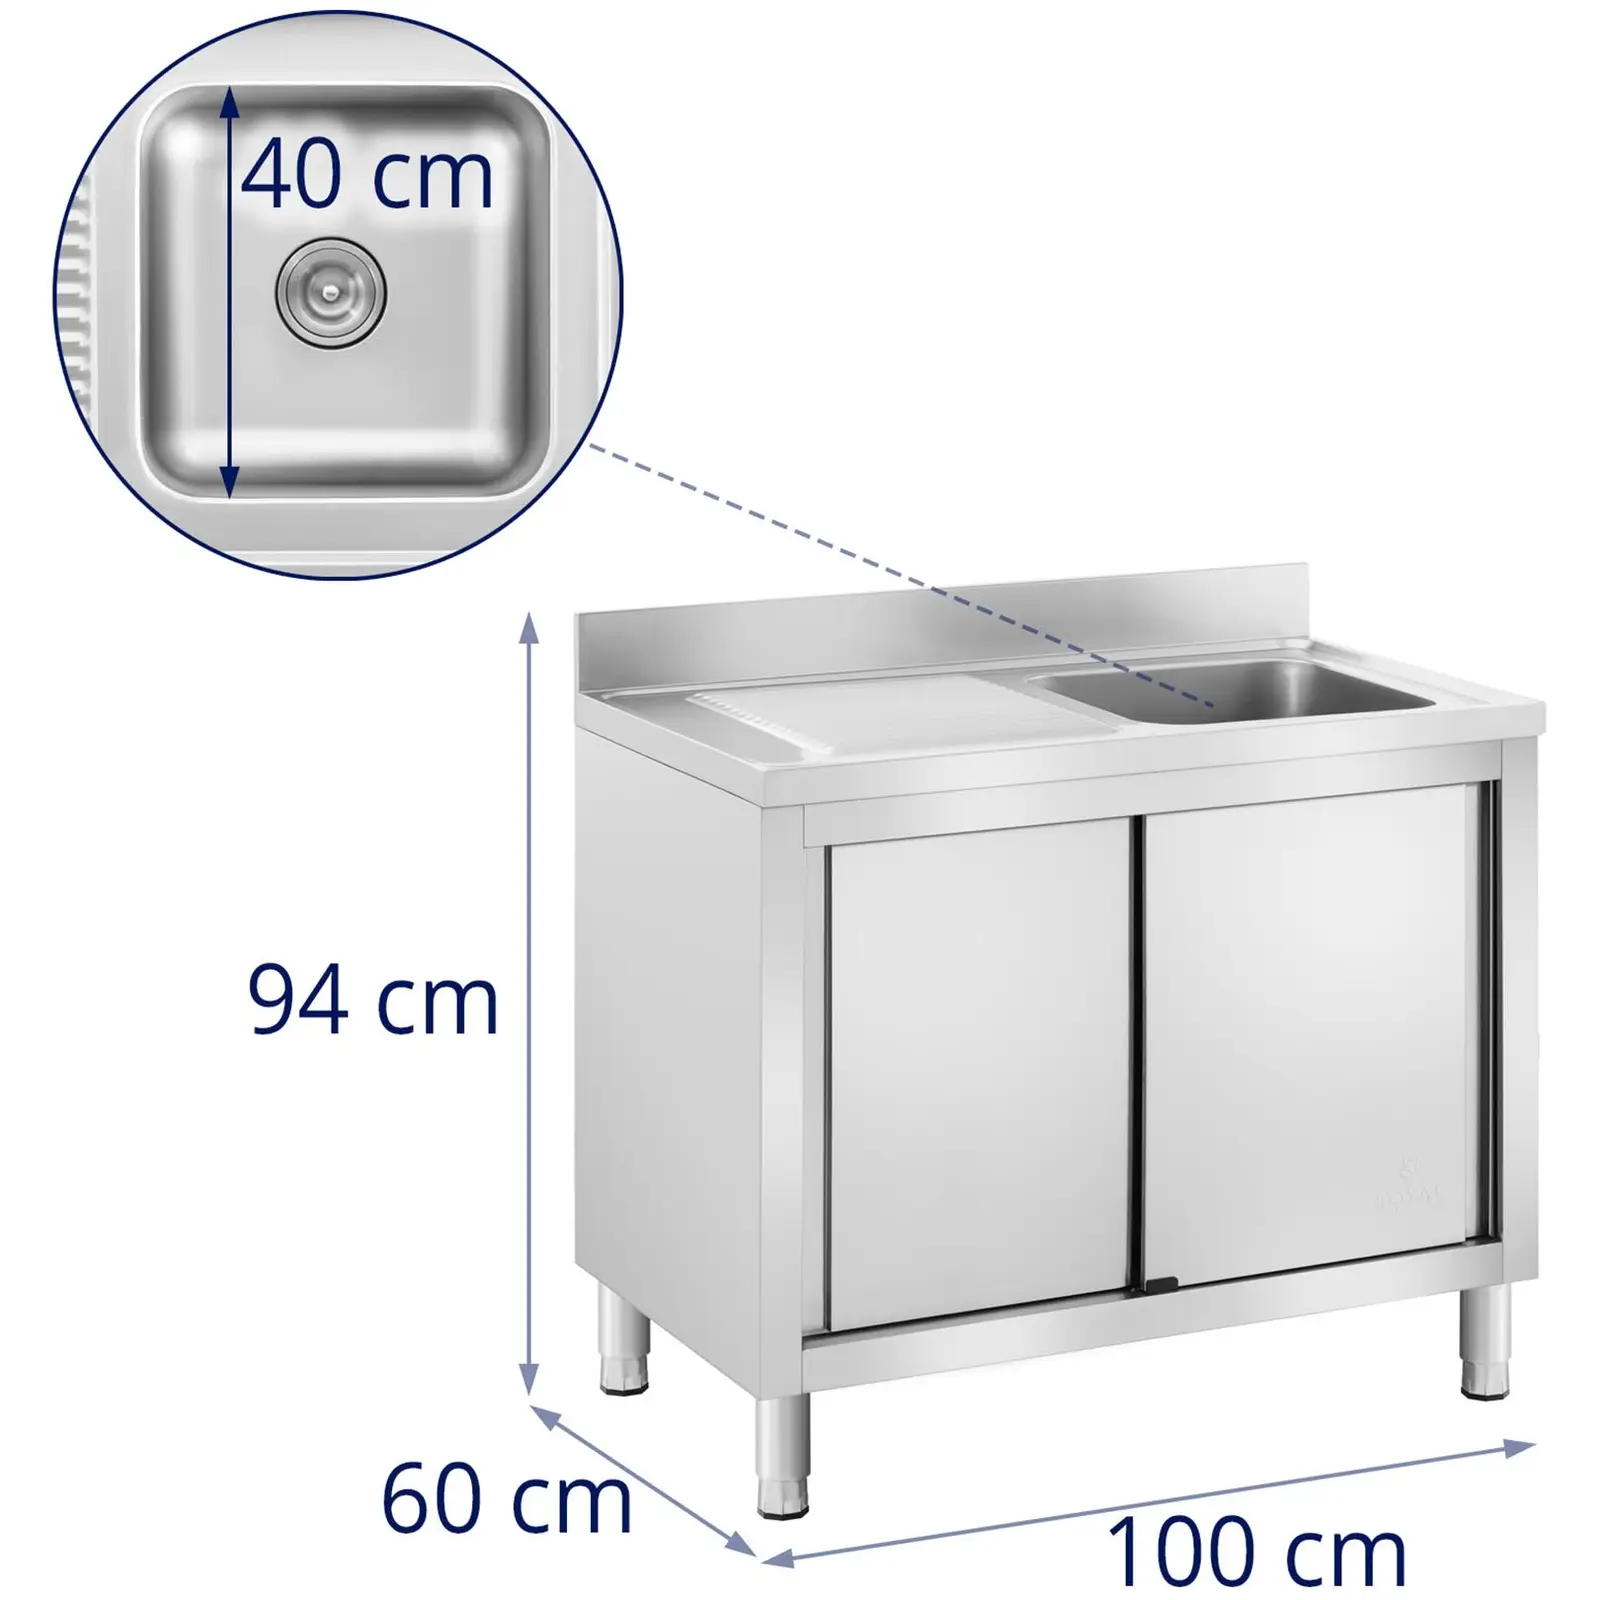 Commercial Sink Unit - 1 basin - Royal Catering - Stainless steel - 400 x 400 x 240 mm